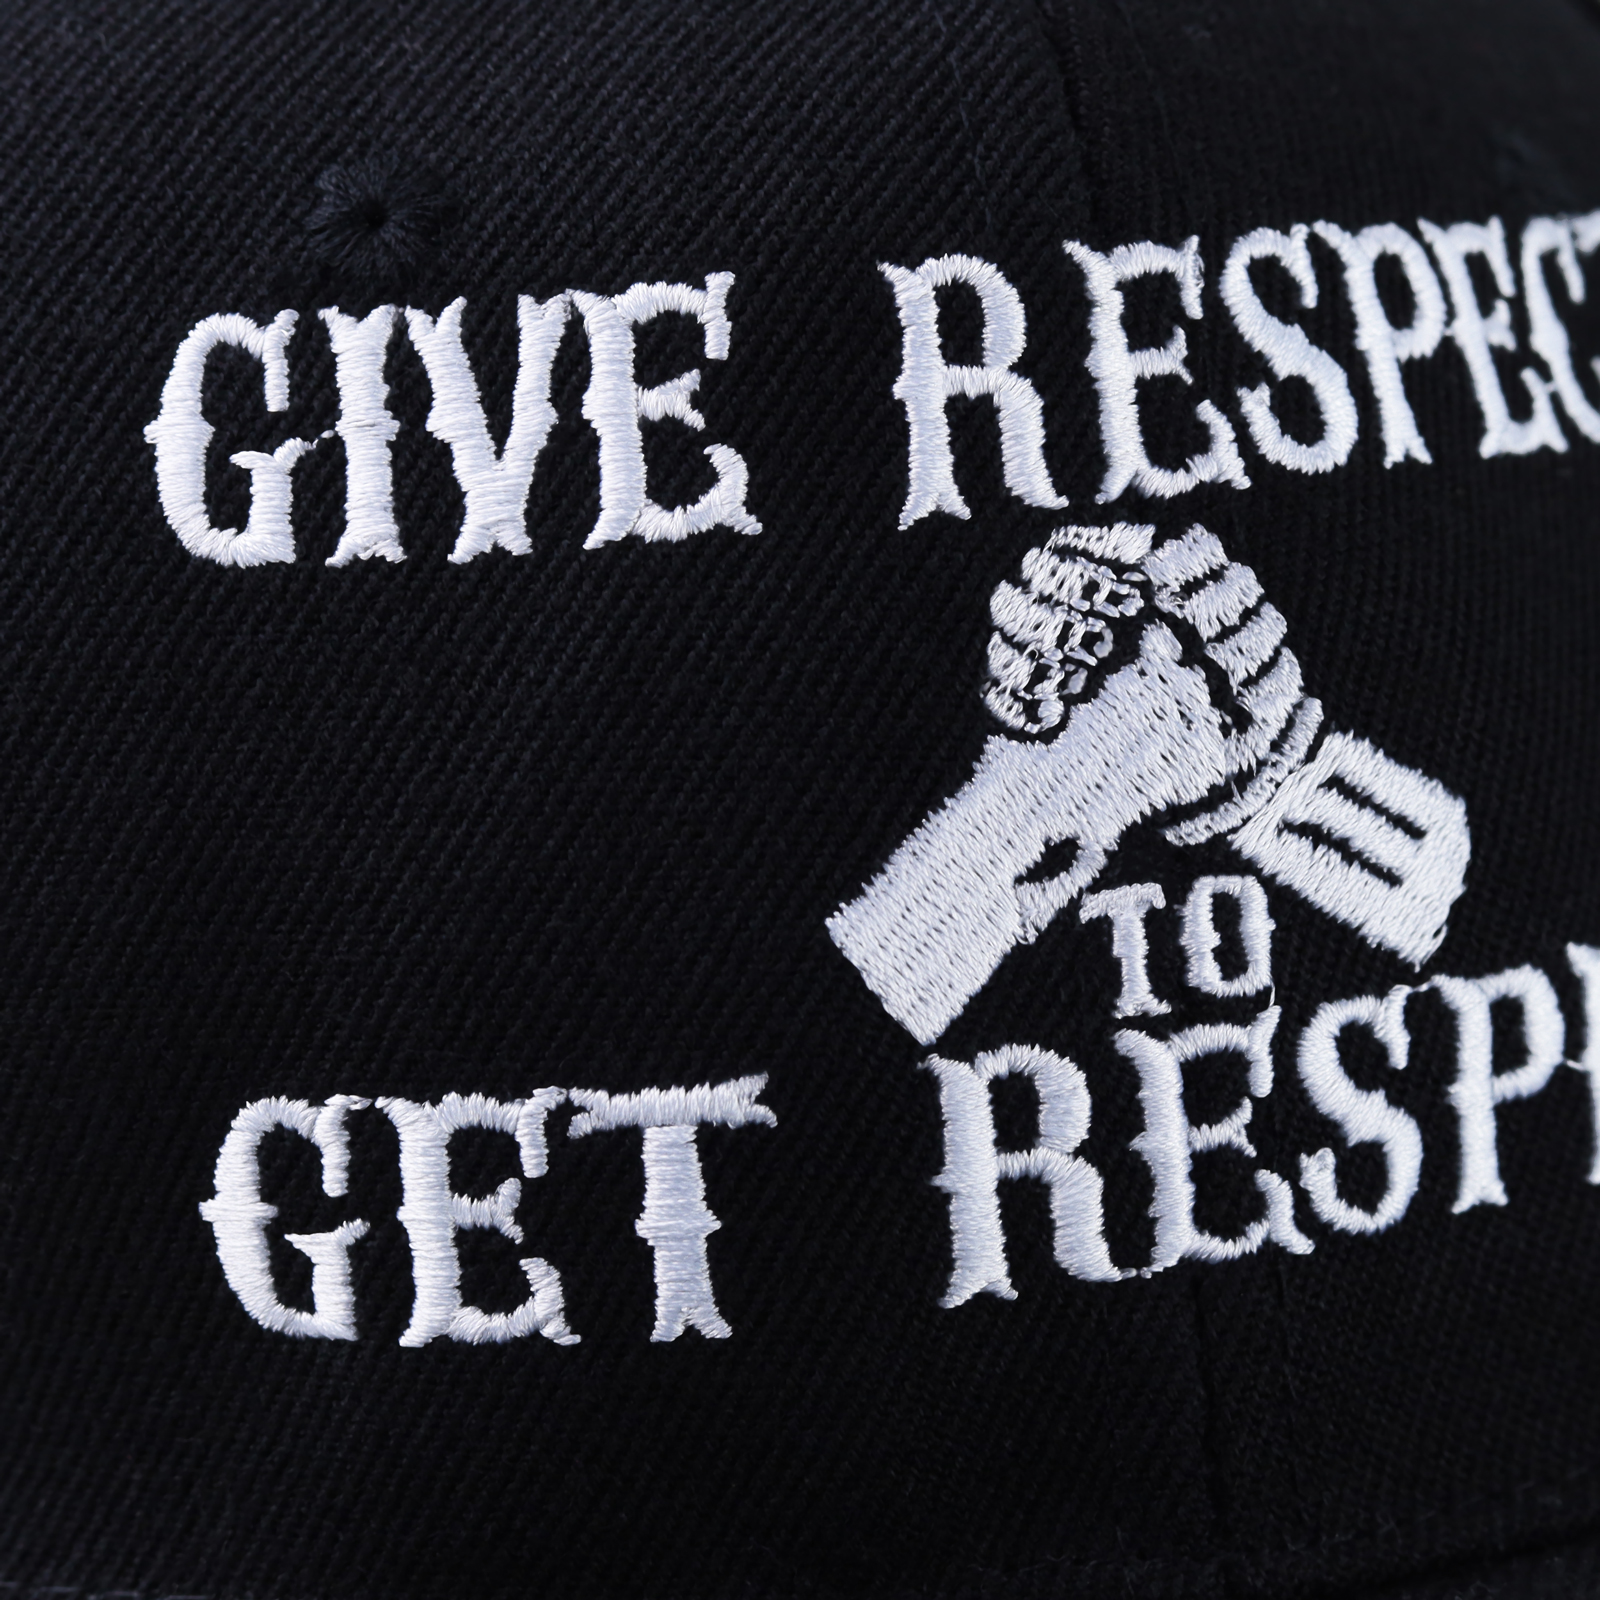 Give respect to get respect - Kappe